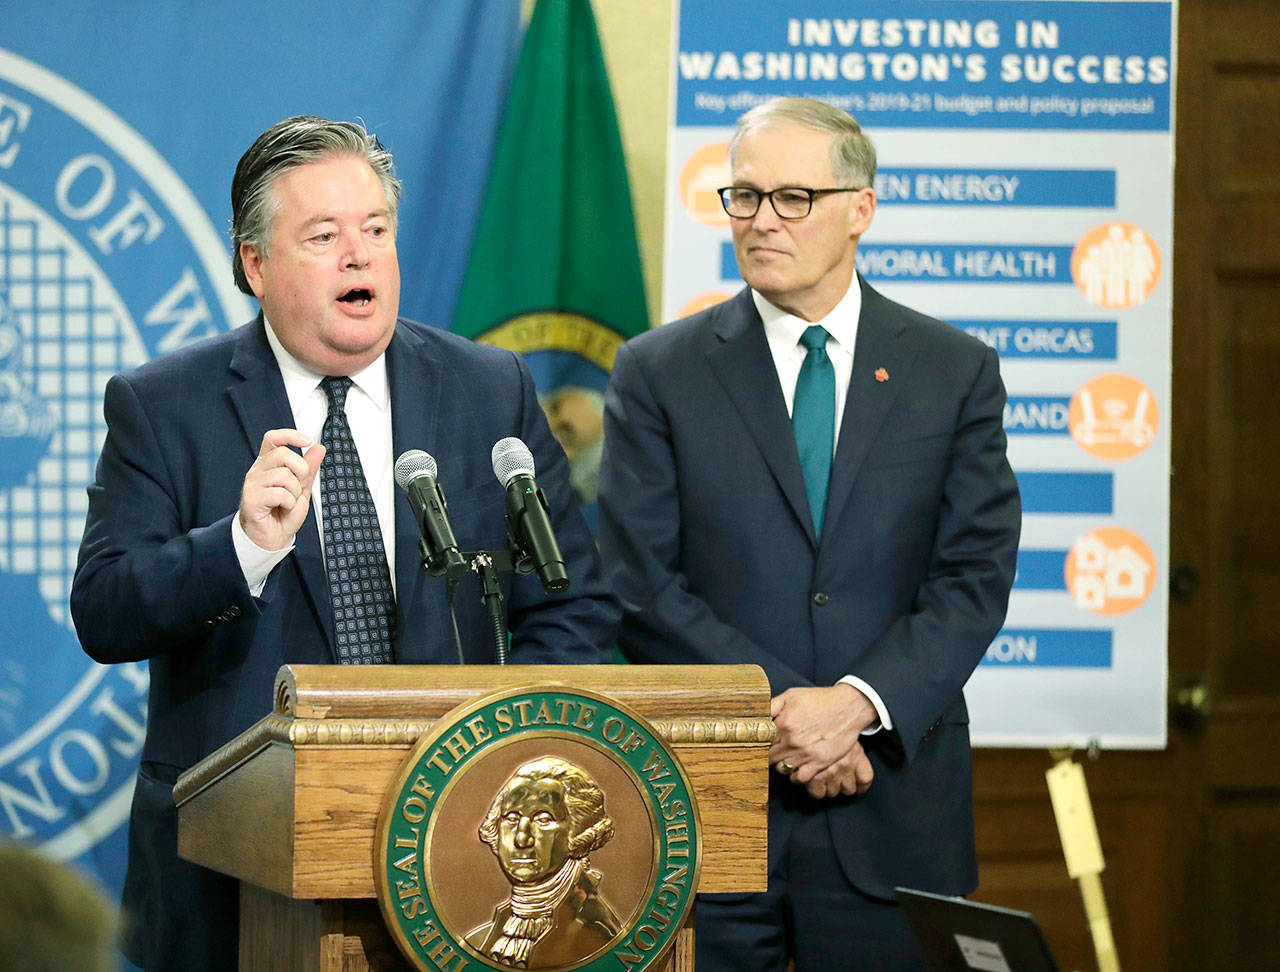 Gov. Jay Inslee, right, looks on as David Schumacher, left, director of the Office of Financial Management, talks to reporters about Inslee’s 2019-2021 budget proposal. (AP Photo/Ted S. Warren)